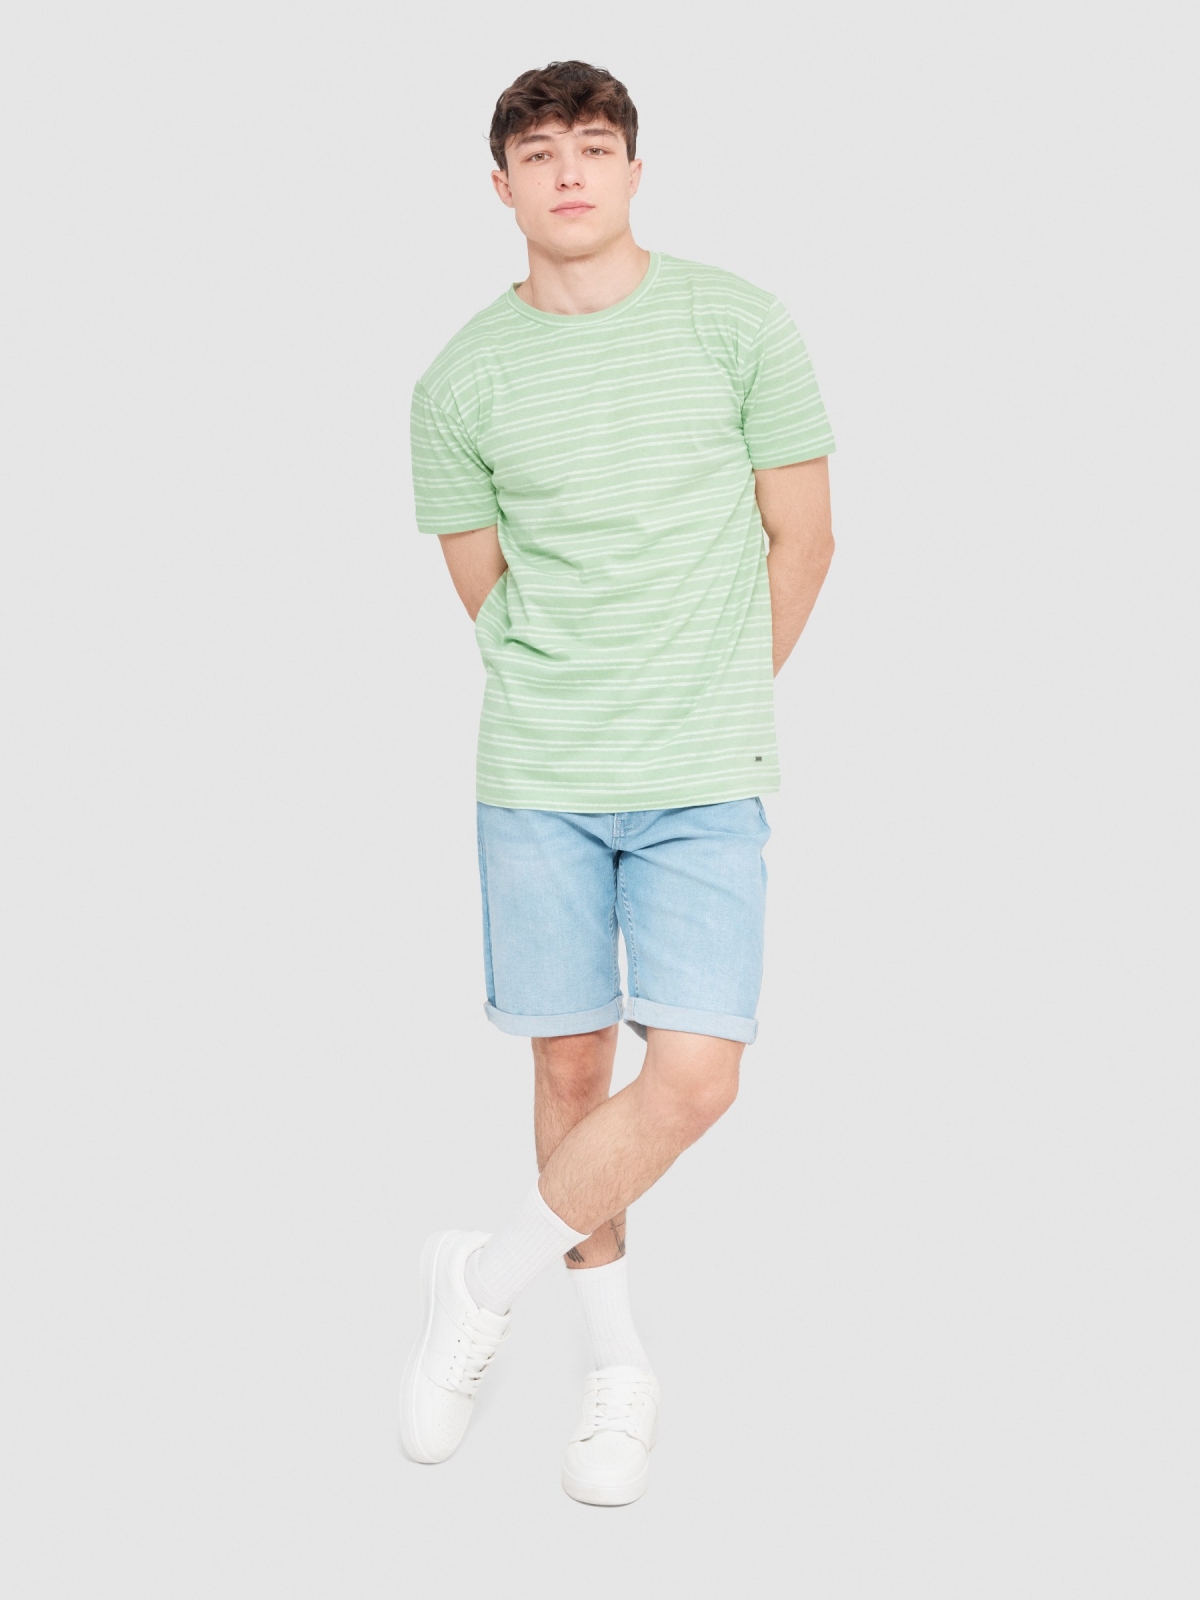 Textured striped T-shirt mint front view